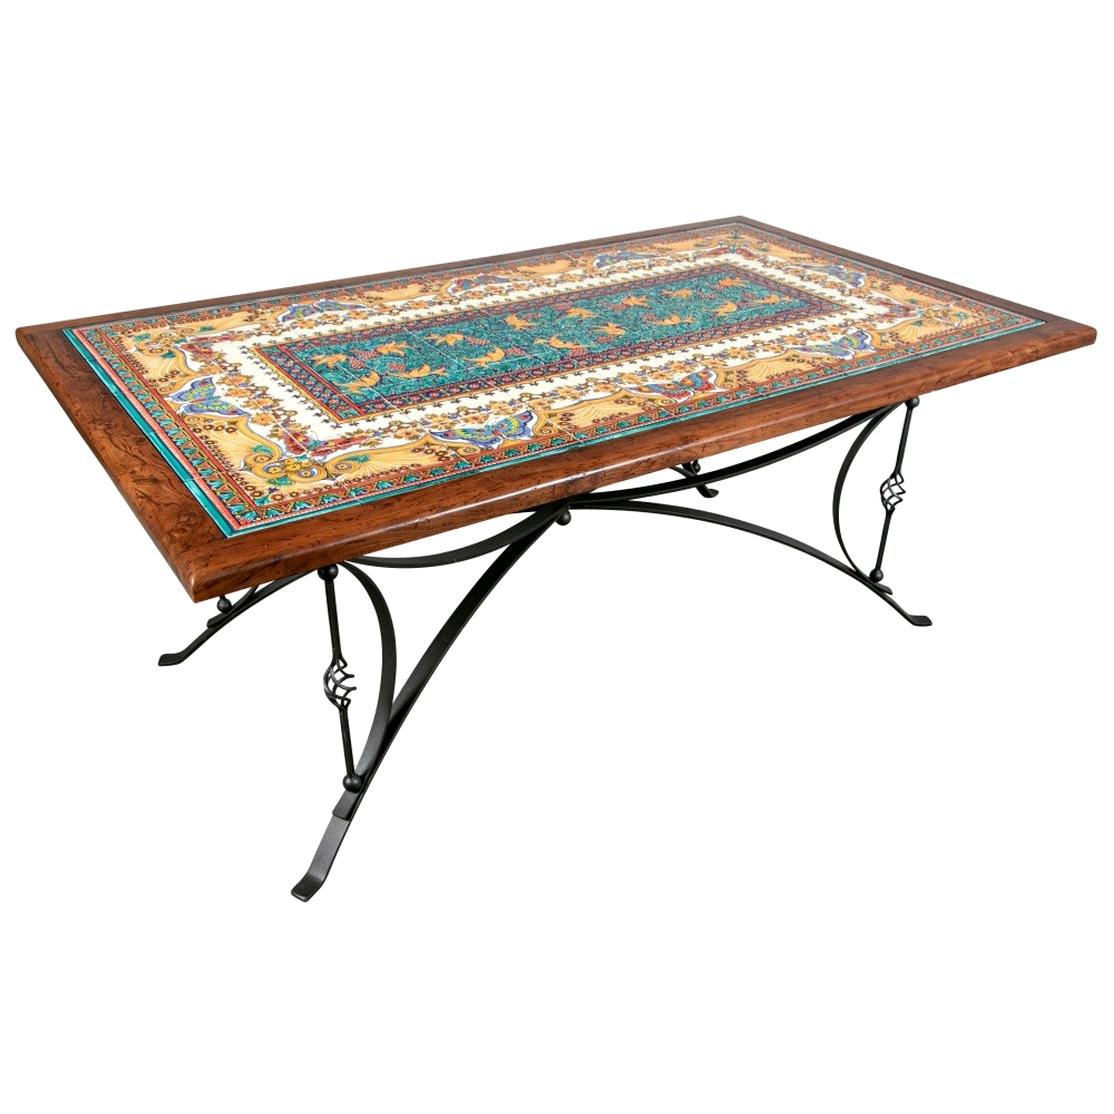 Italian Tile Top Dining Table with Wrought Iron Base